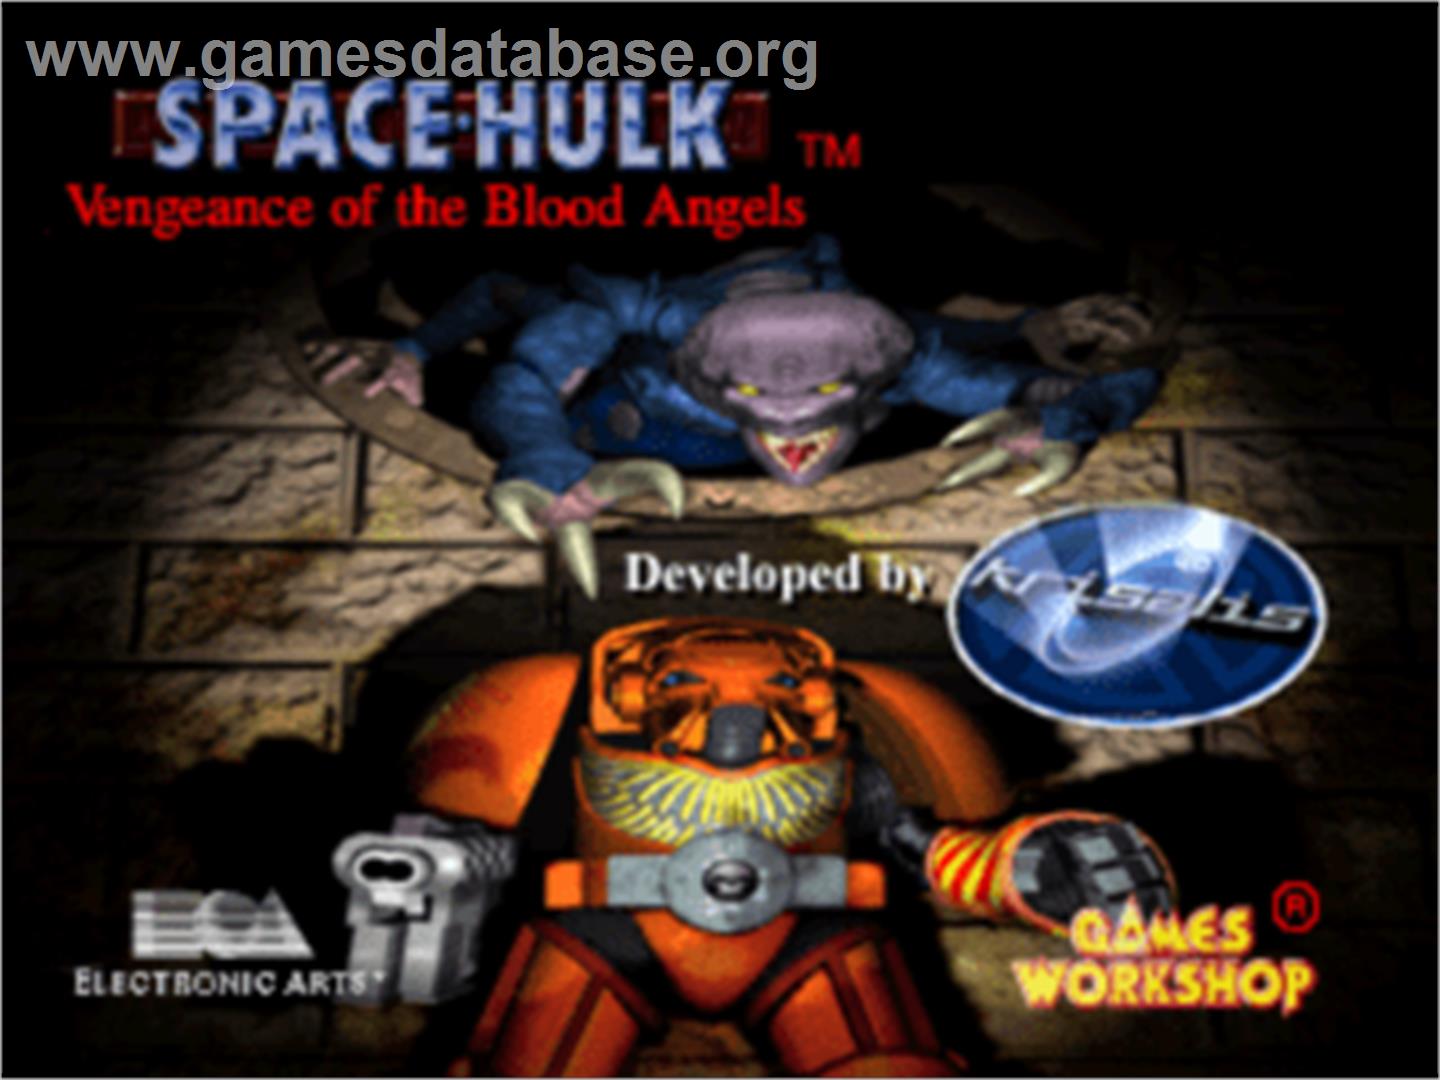 Space Hulk: Vengeance of the Blood Angels - Sony Playstation - Artwork - Title Screen